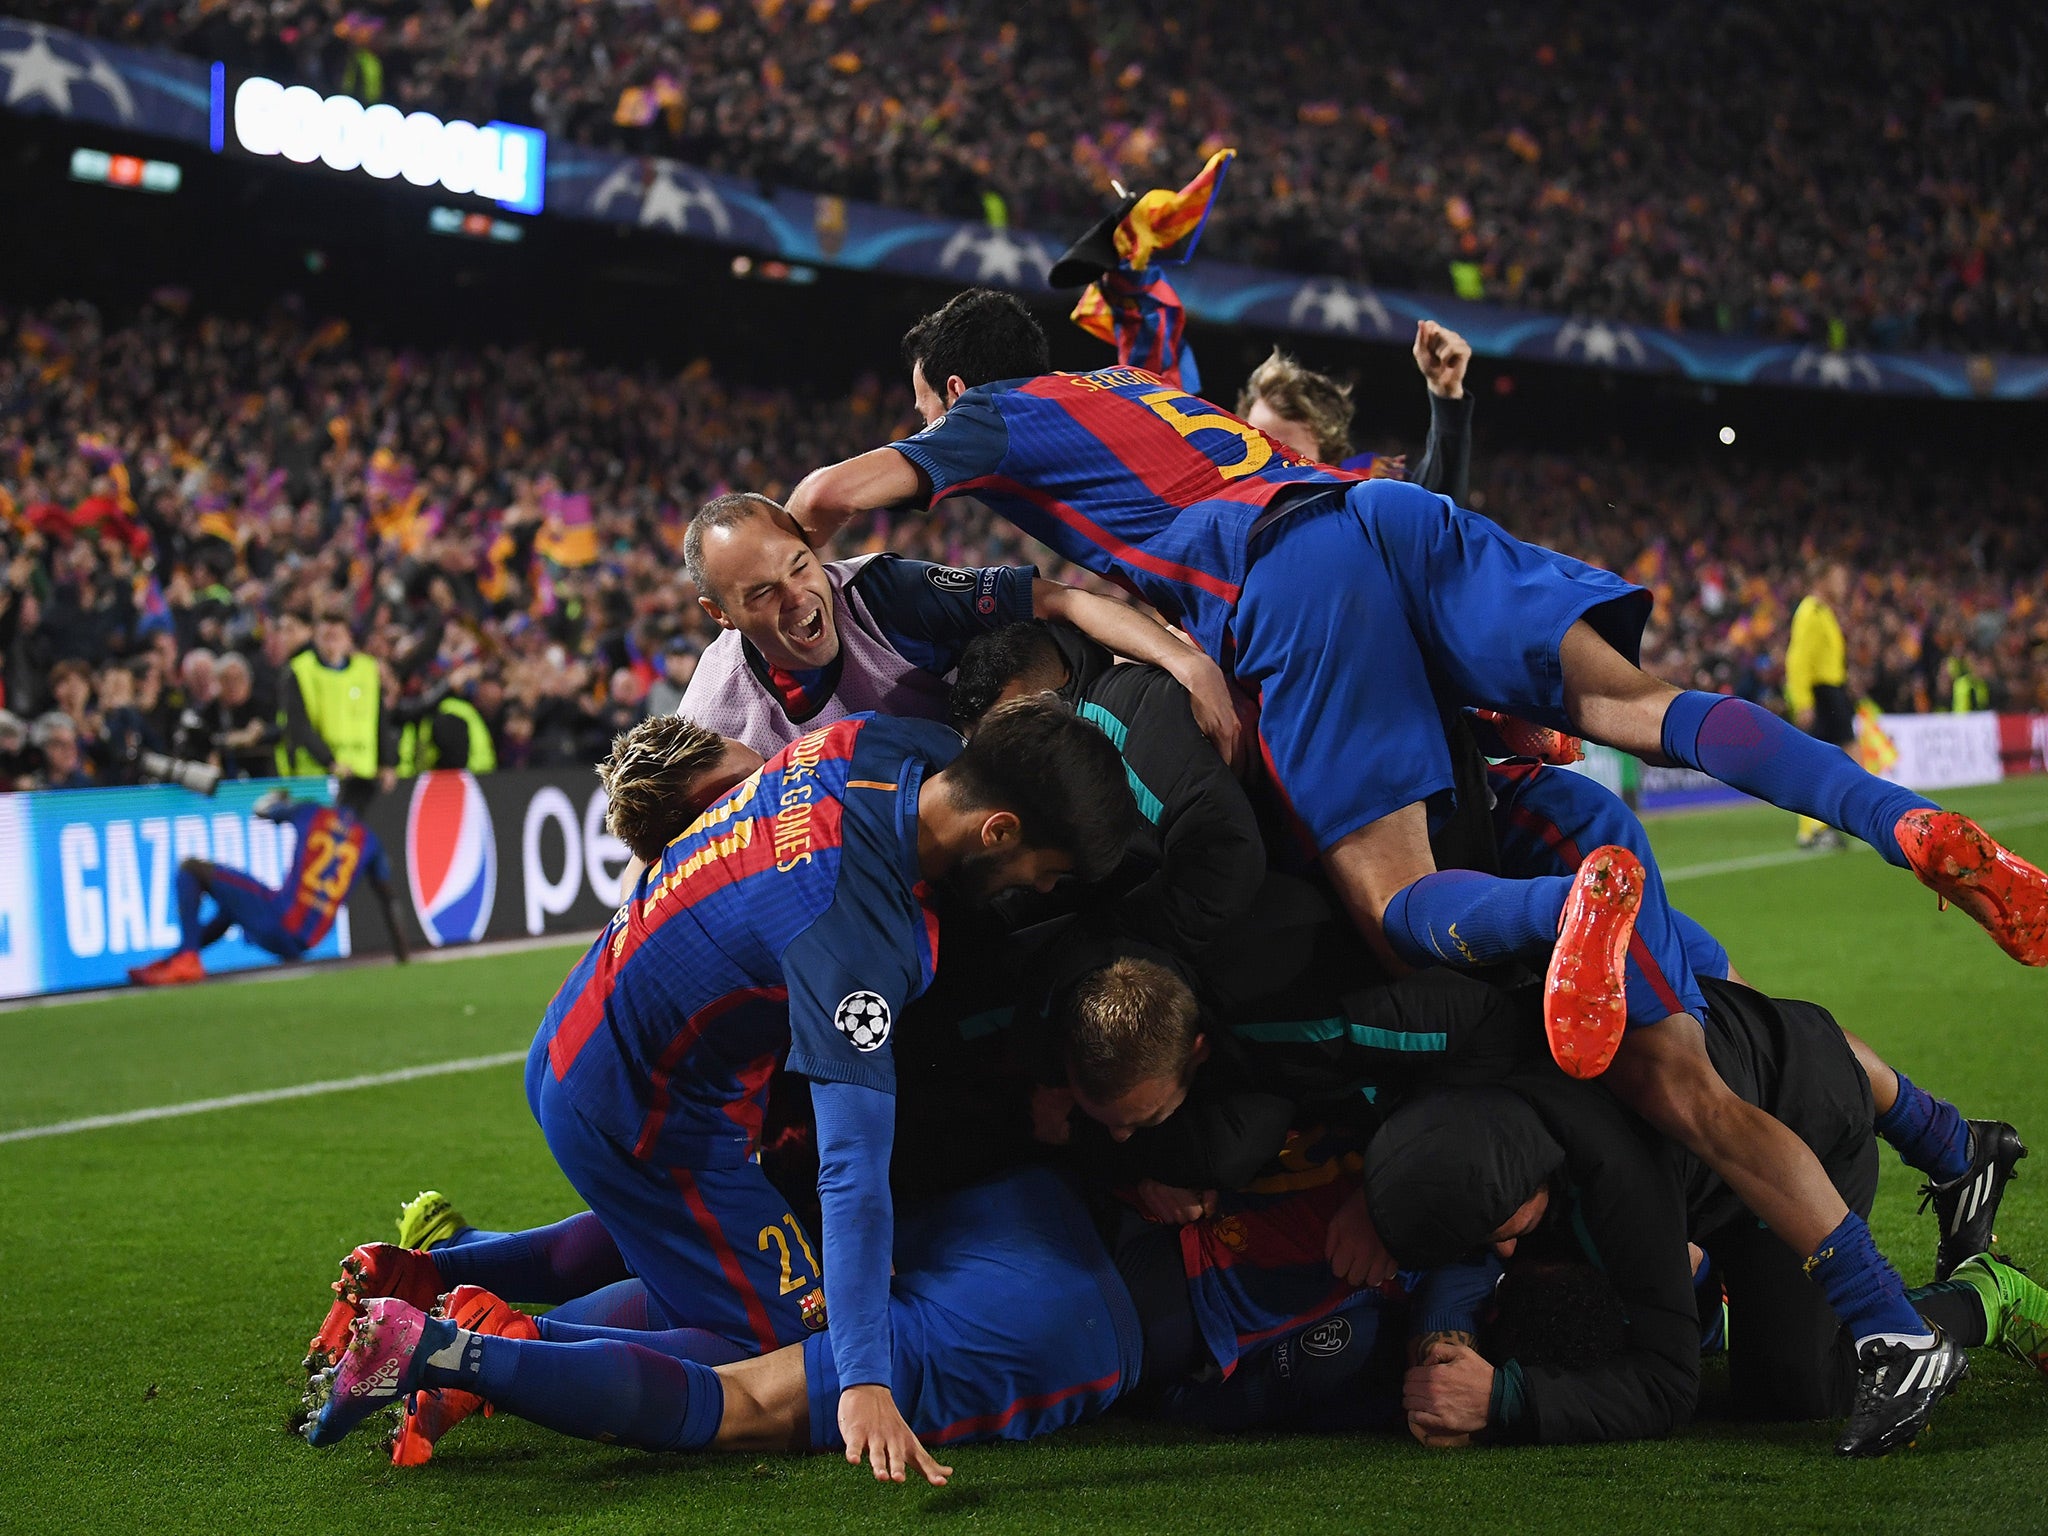 Sergi Roberto was mobbed after scoring the late goal which sealed Barcelona's progress to the quarter-finals